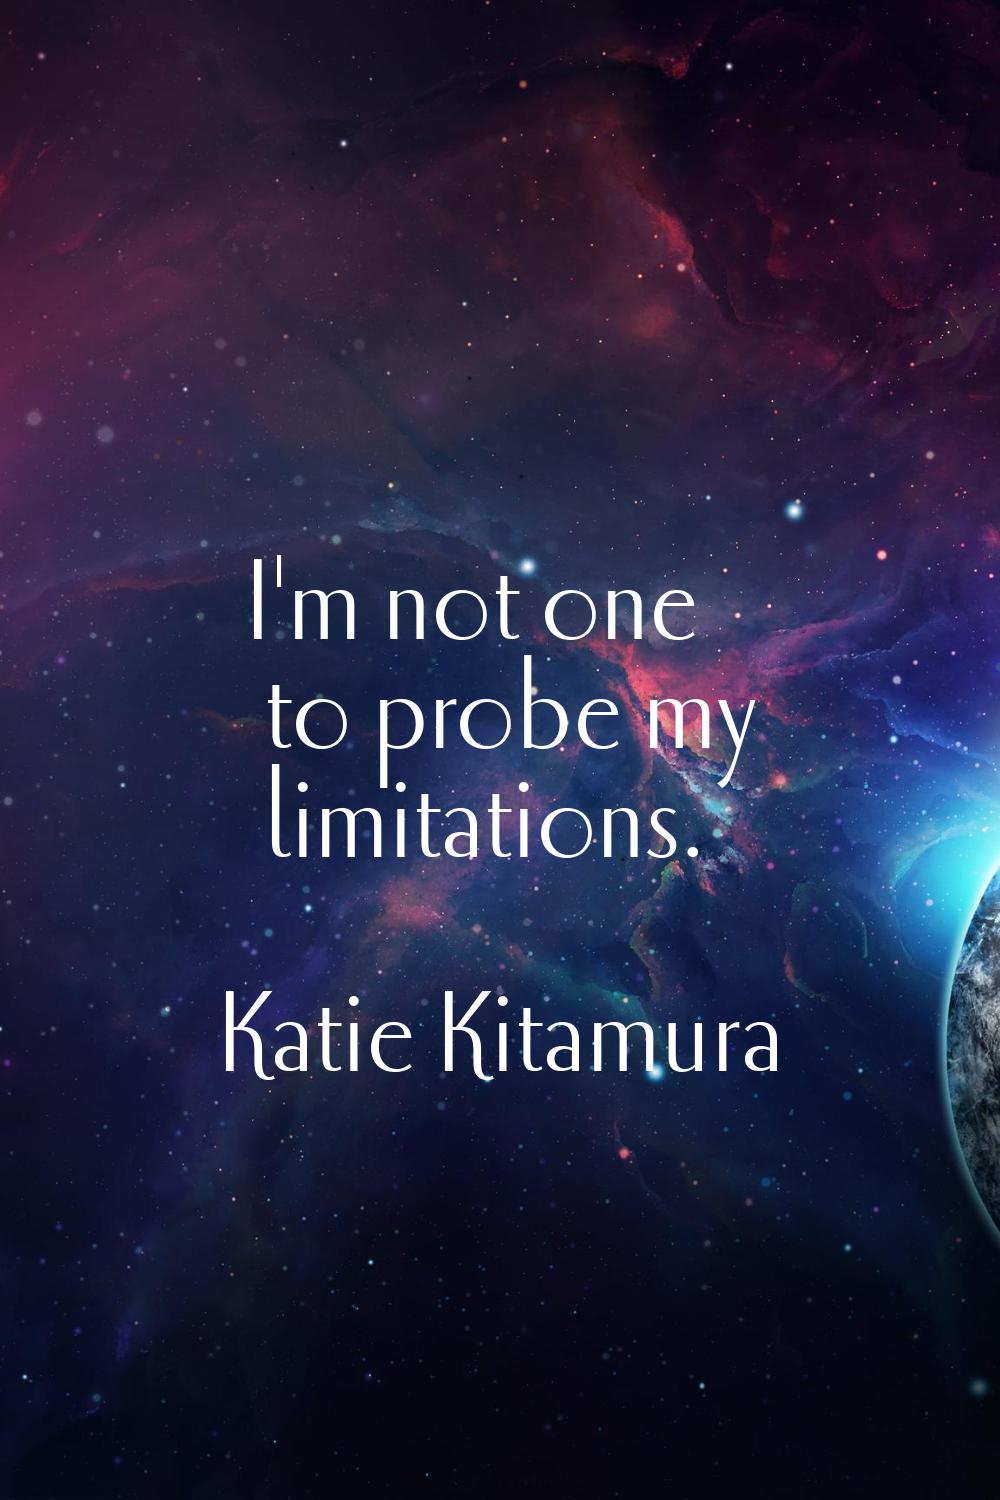 I'm not one to probe my limitations.